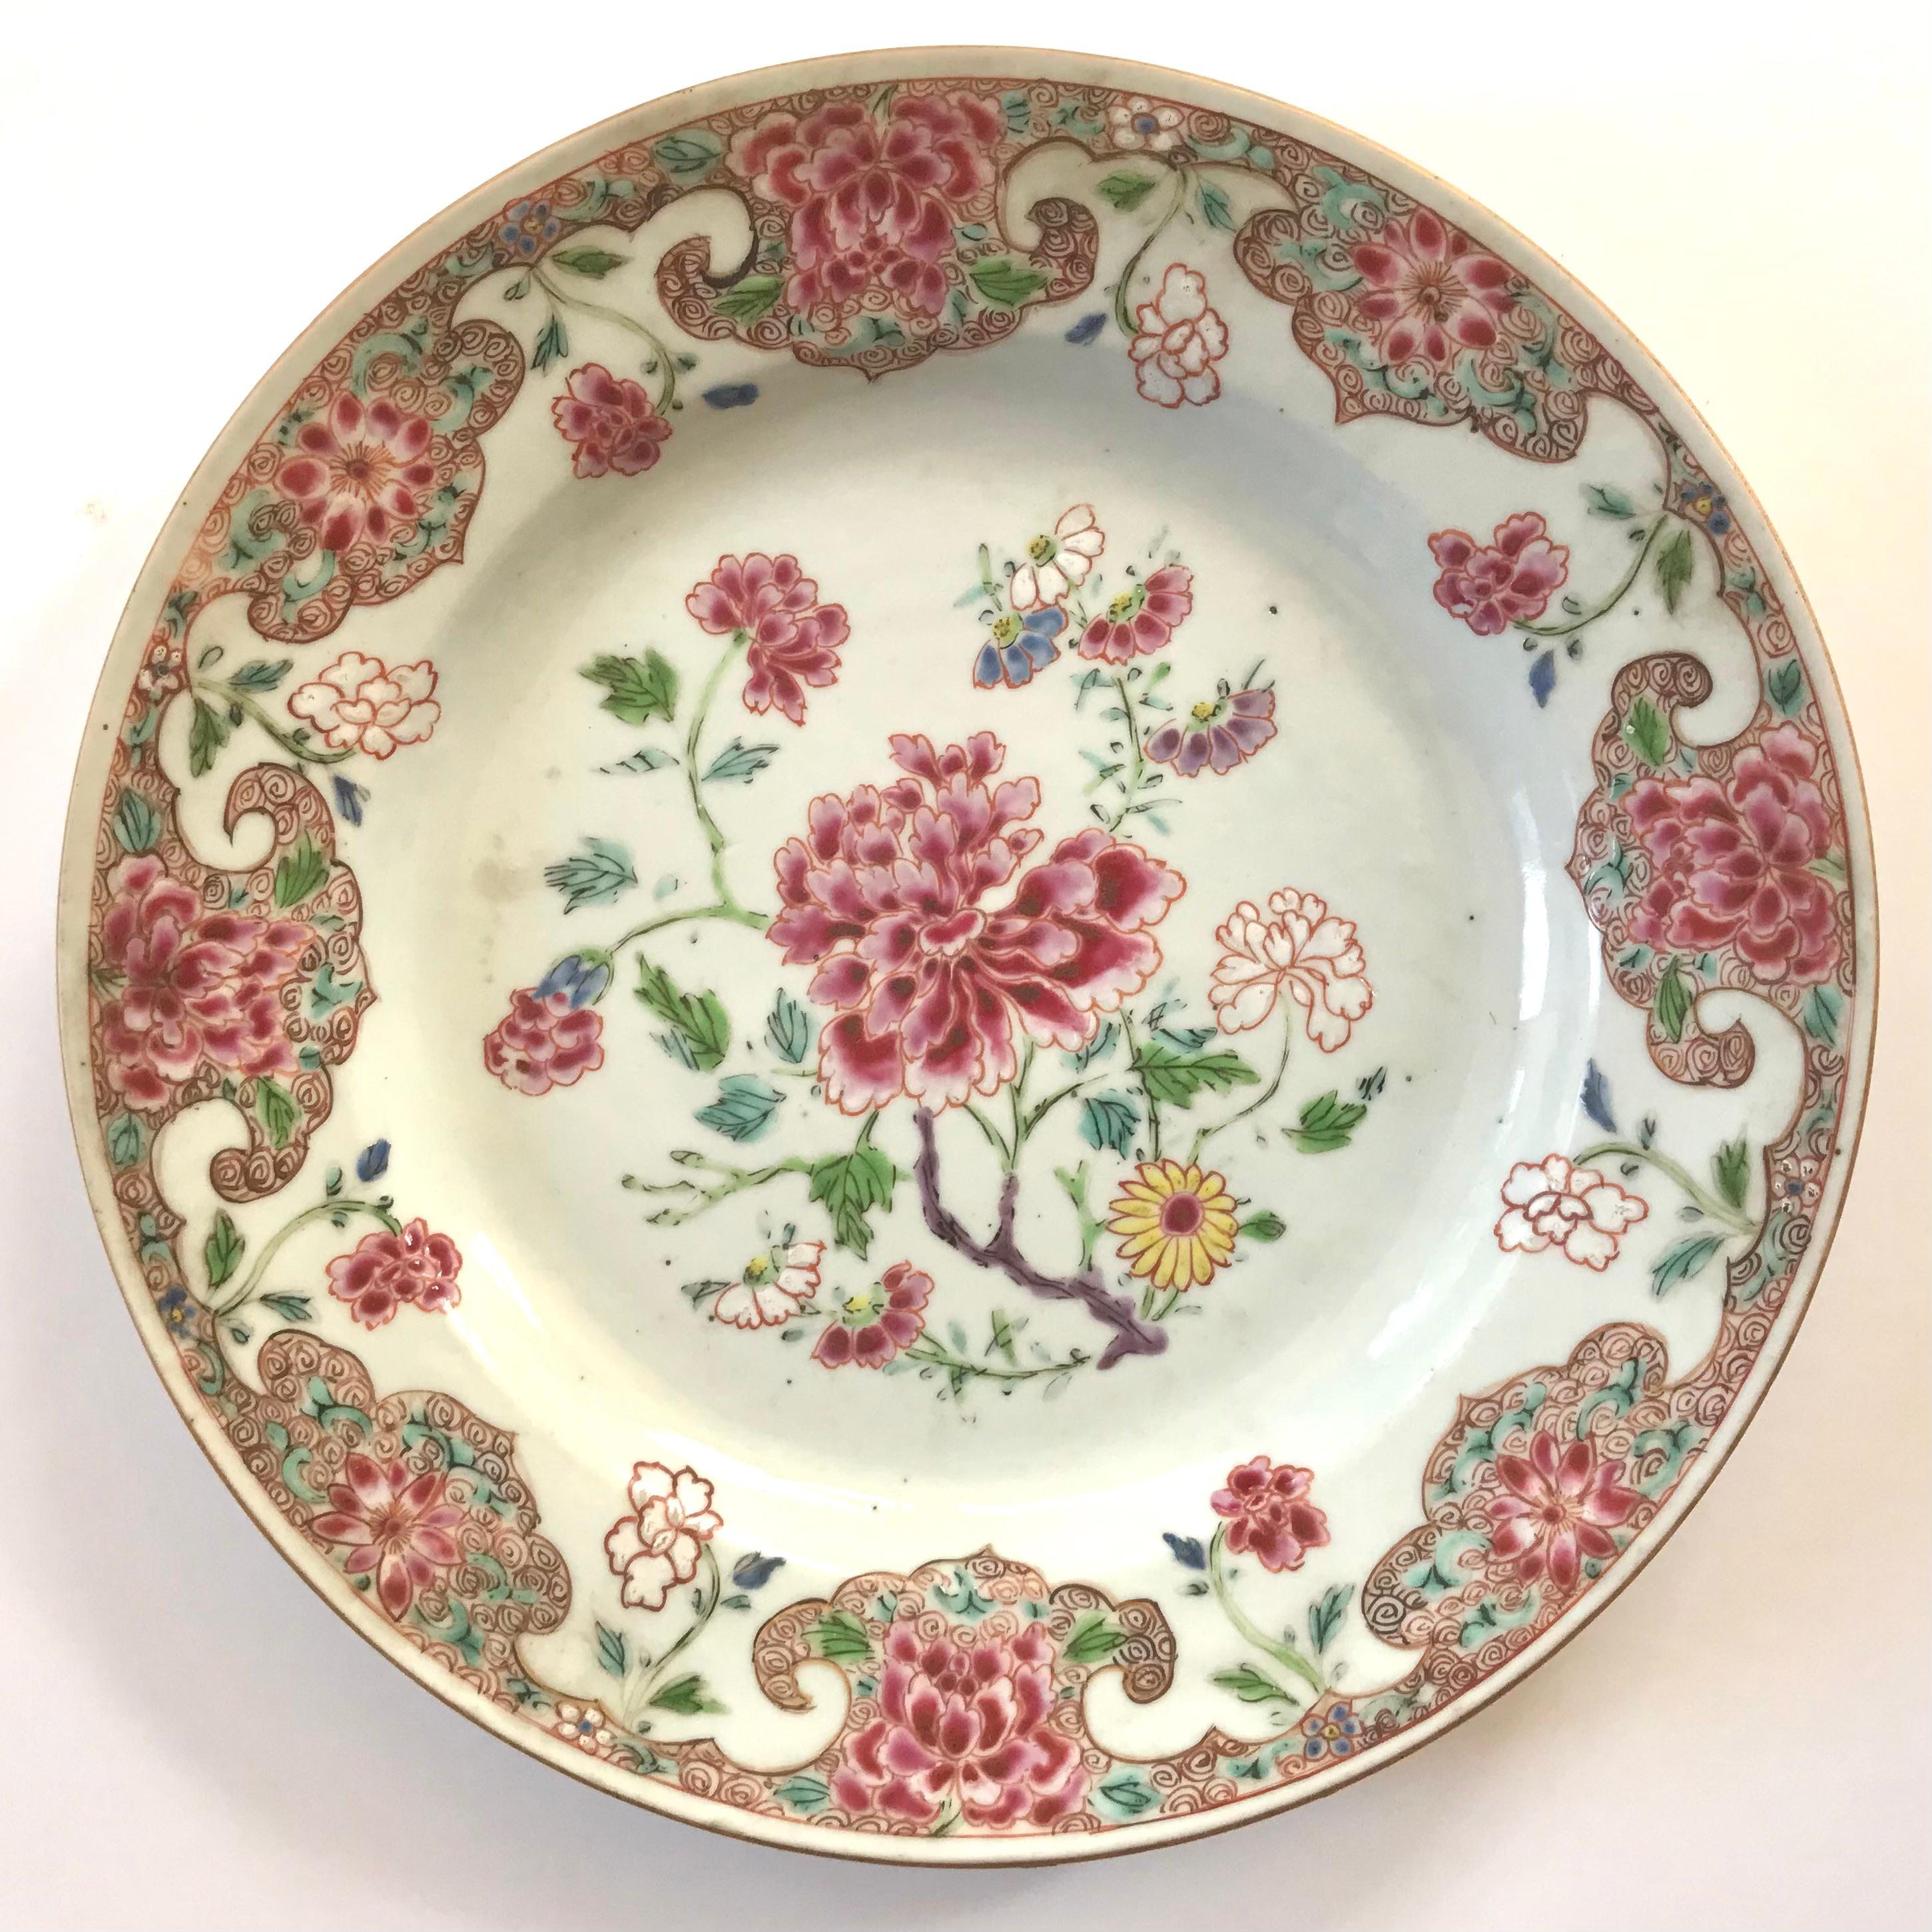 A Chinese famille rose plate. Yongzheng period
Decorated in the famille rose palette with peonies and other flowers.

Country: China
Period : Yongzheng (1723-1735)
Material: Porcelain
Dimension: 9 in. (23 cm)

Condition. Excellent and ready to hang